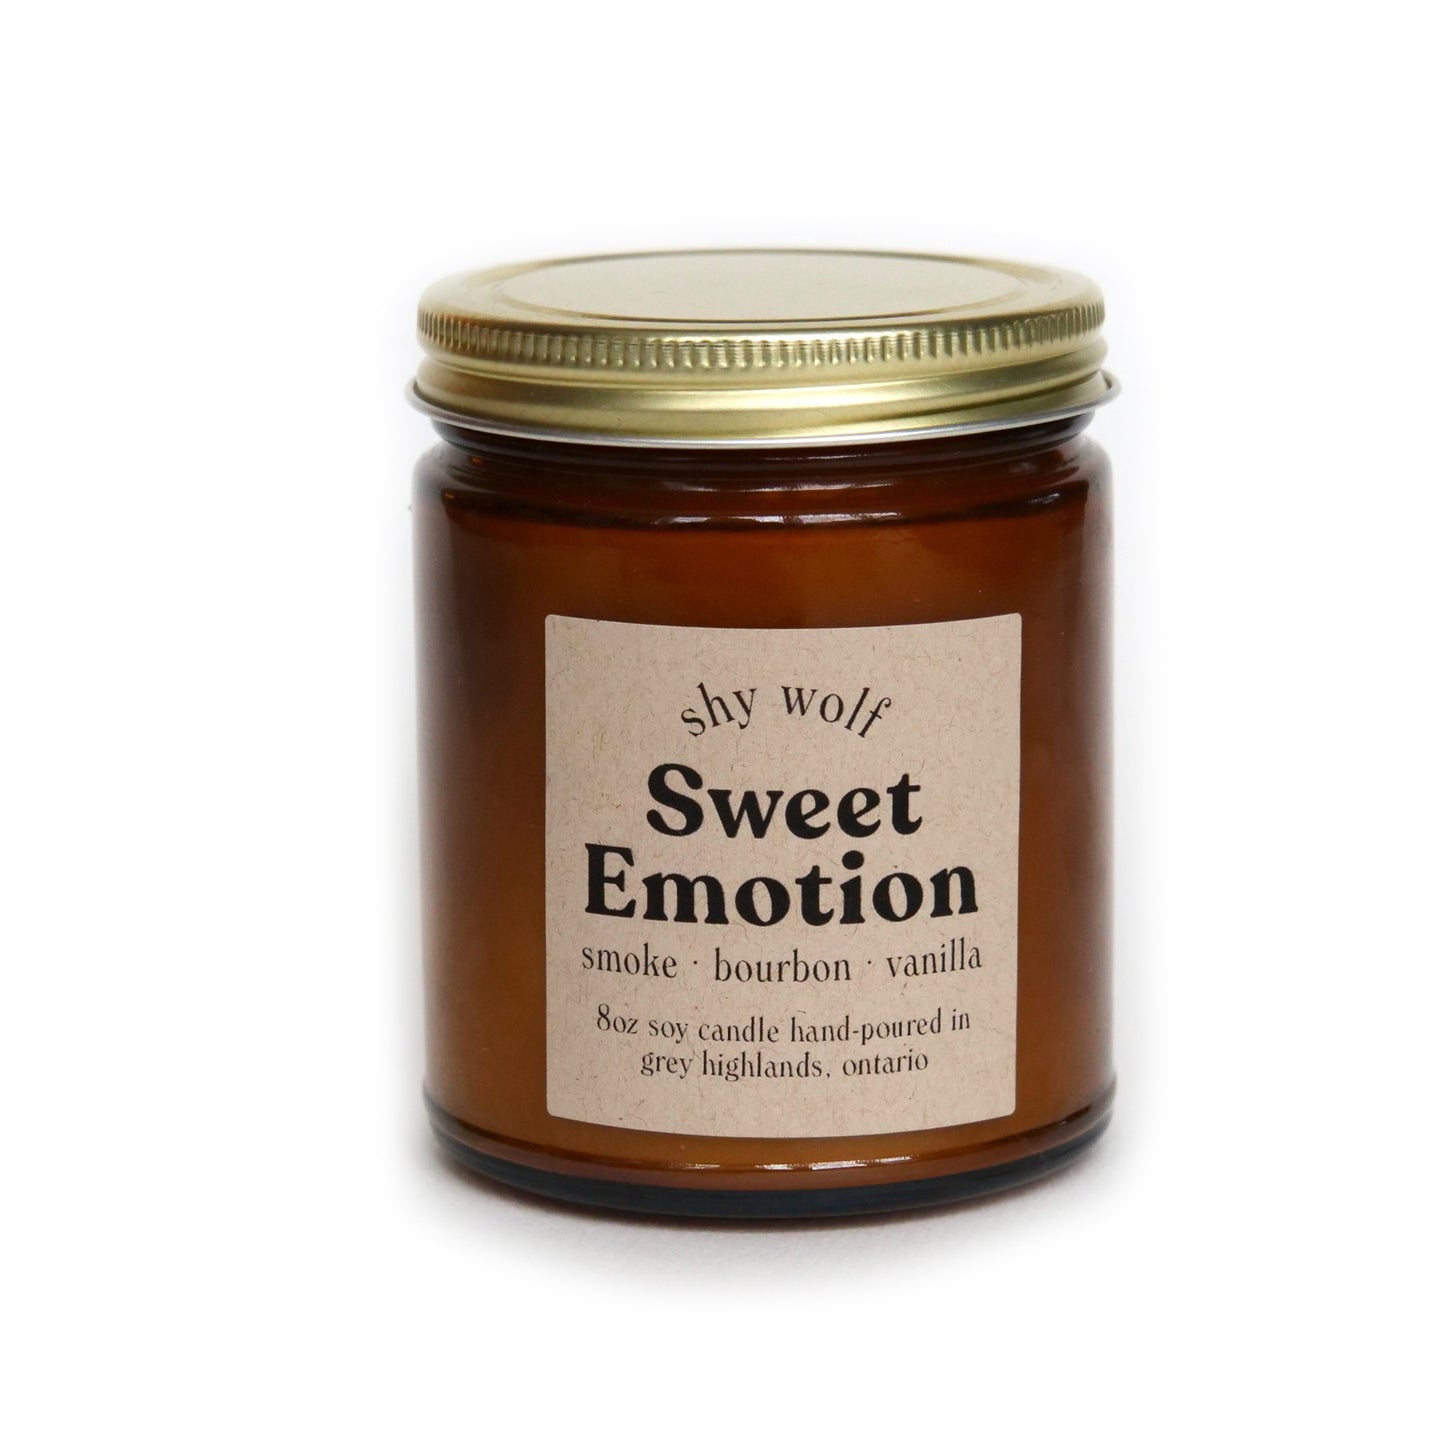 All natural hand-poured "Sweet Emotion" scented soy candle made in Canada by Shy Wolf candles.